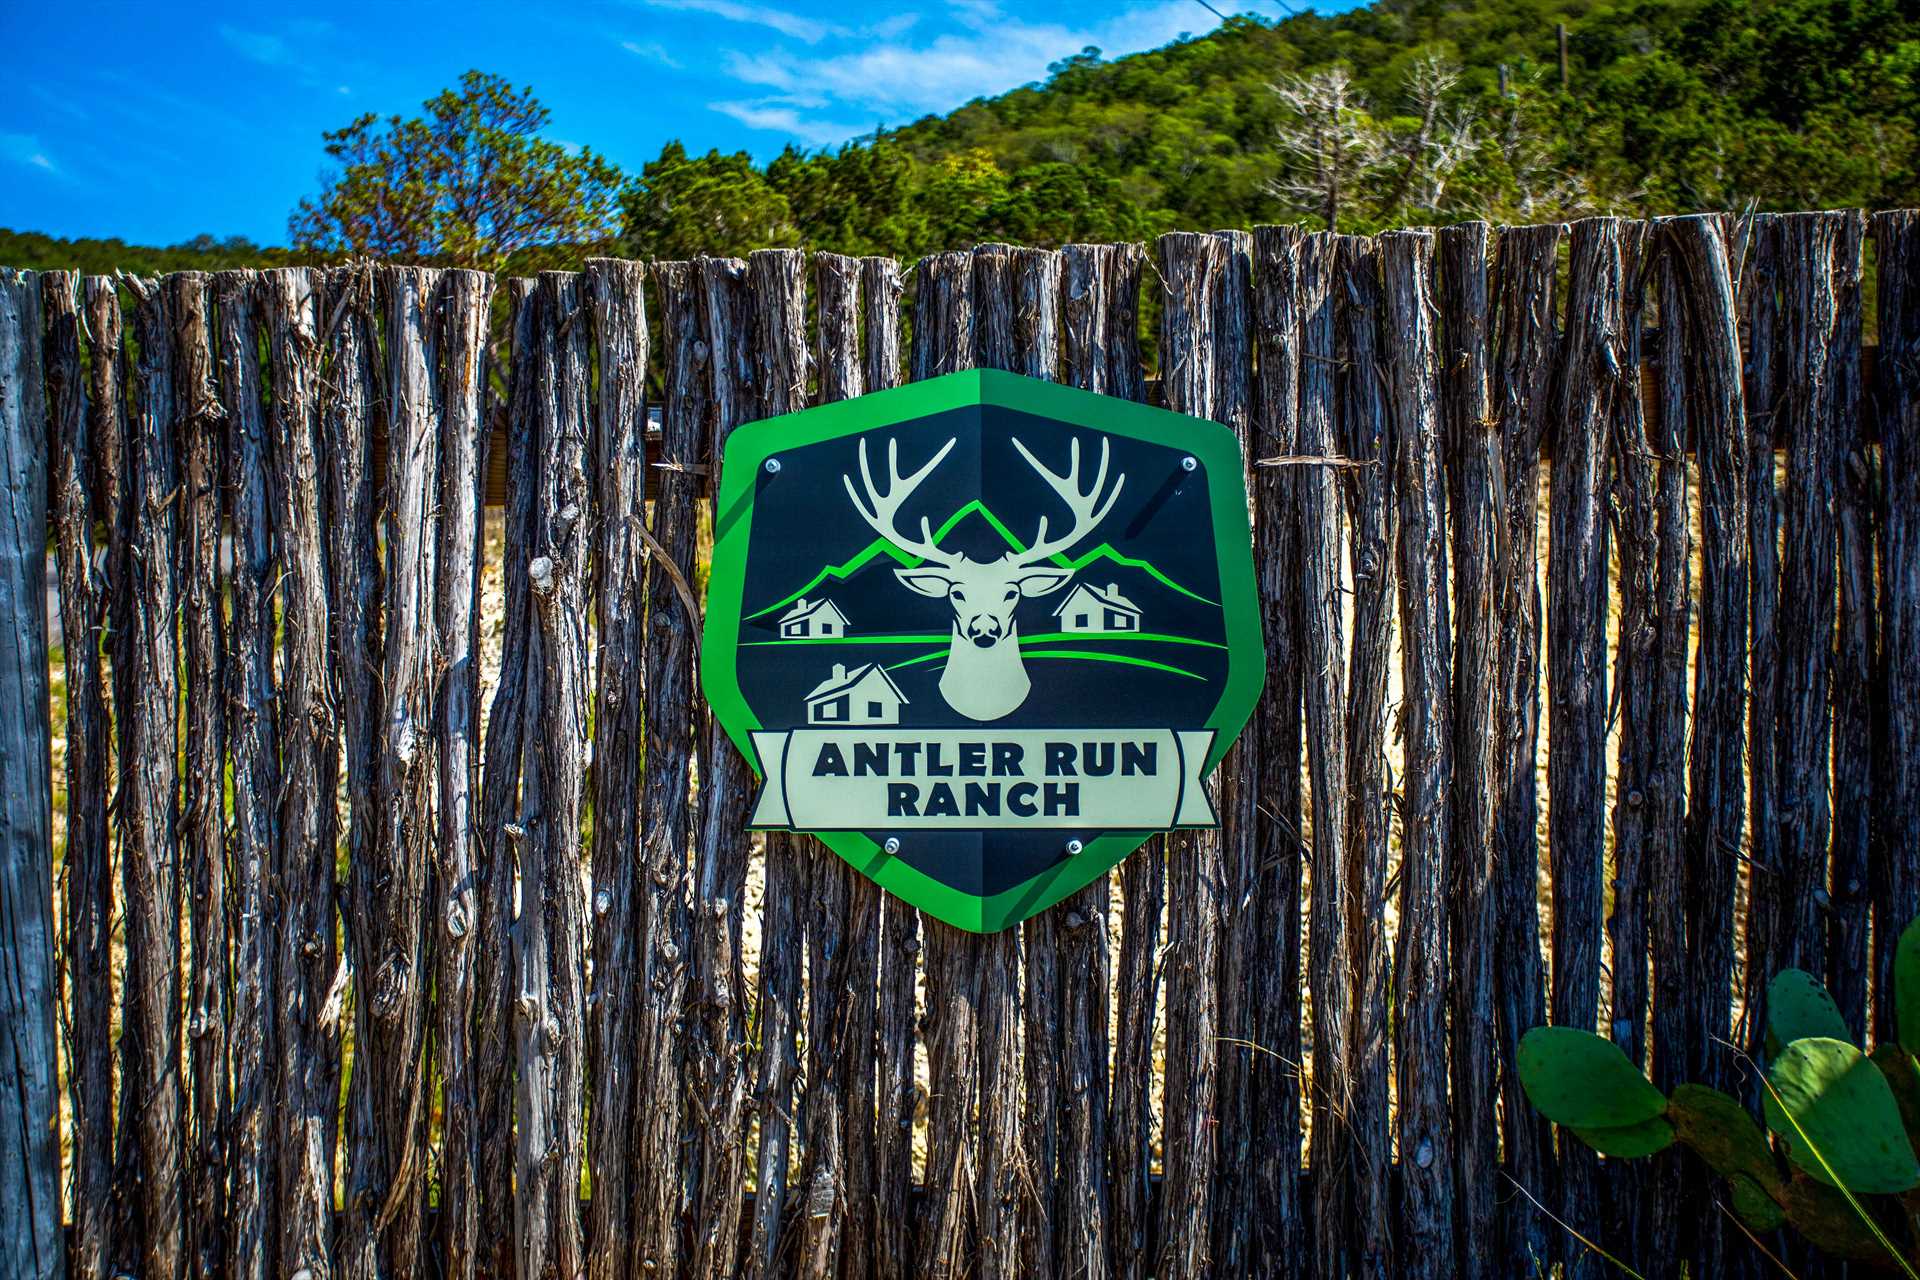                                                 Welcome to the Antler Run Ranch! Visit the Casita, and find out for yourself the many things that make our guests fall in love with the Texas Hill Country.